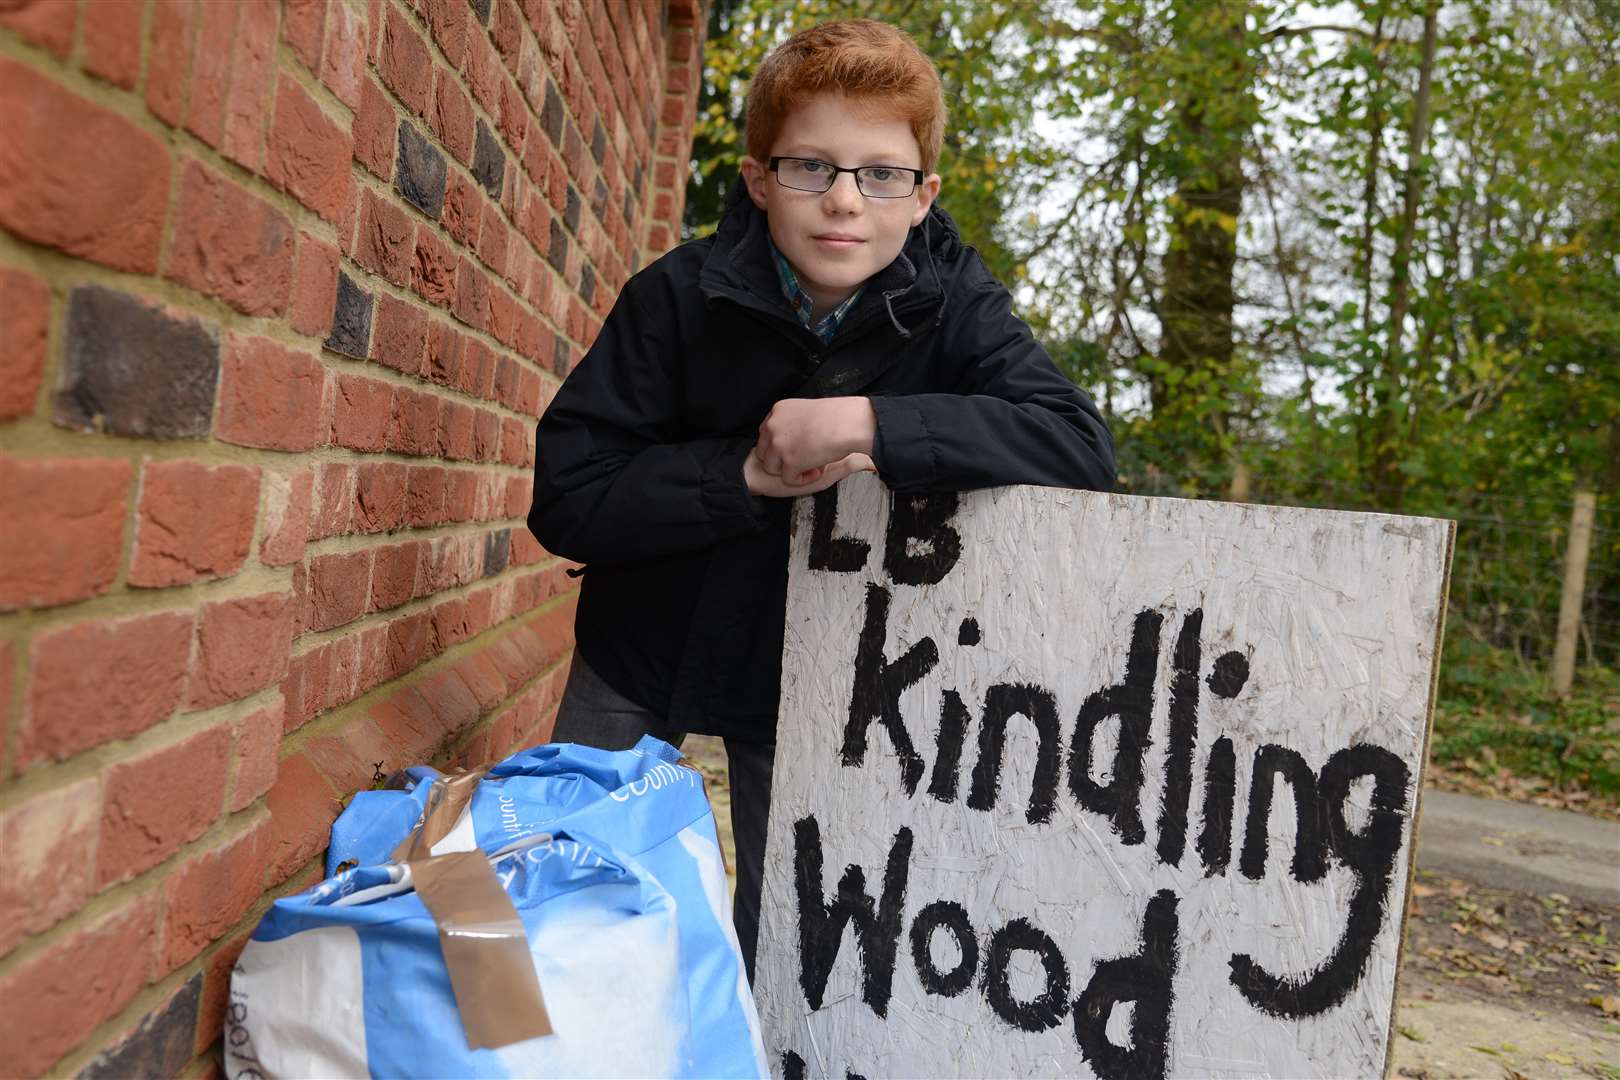 Lewis Banks, 11, who has received an apology from the thief